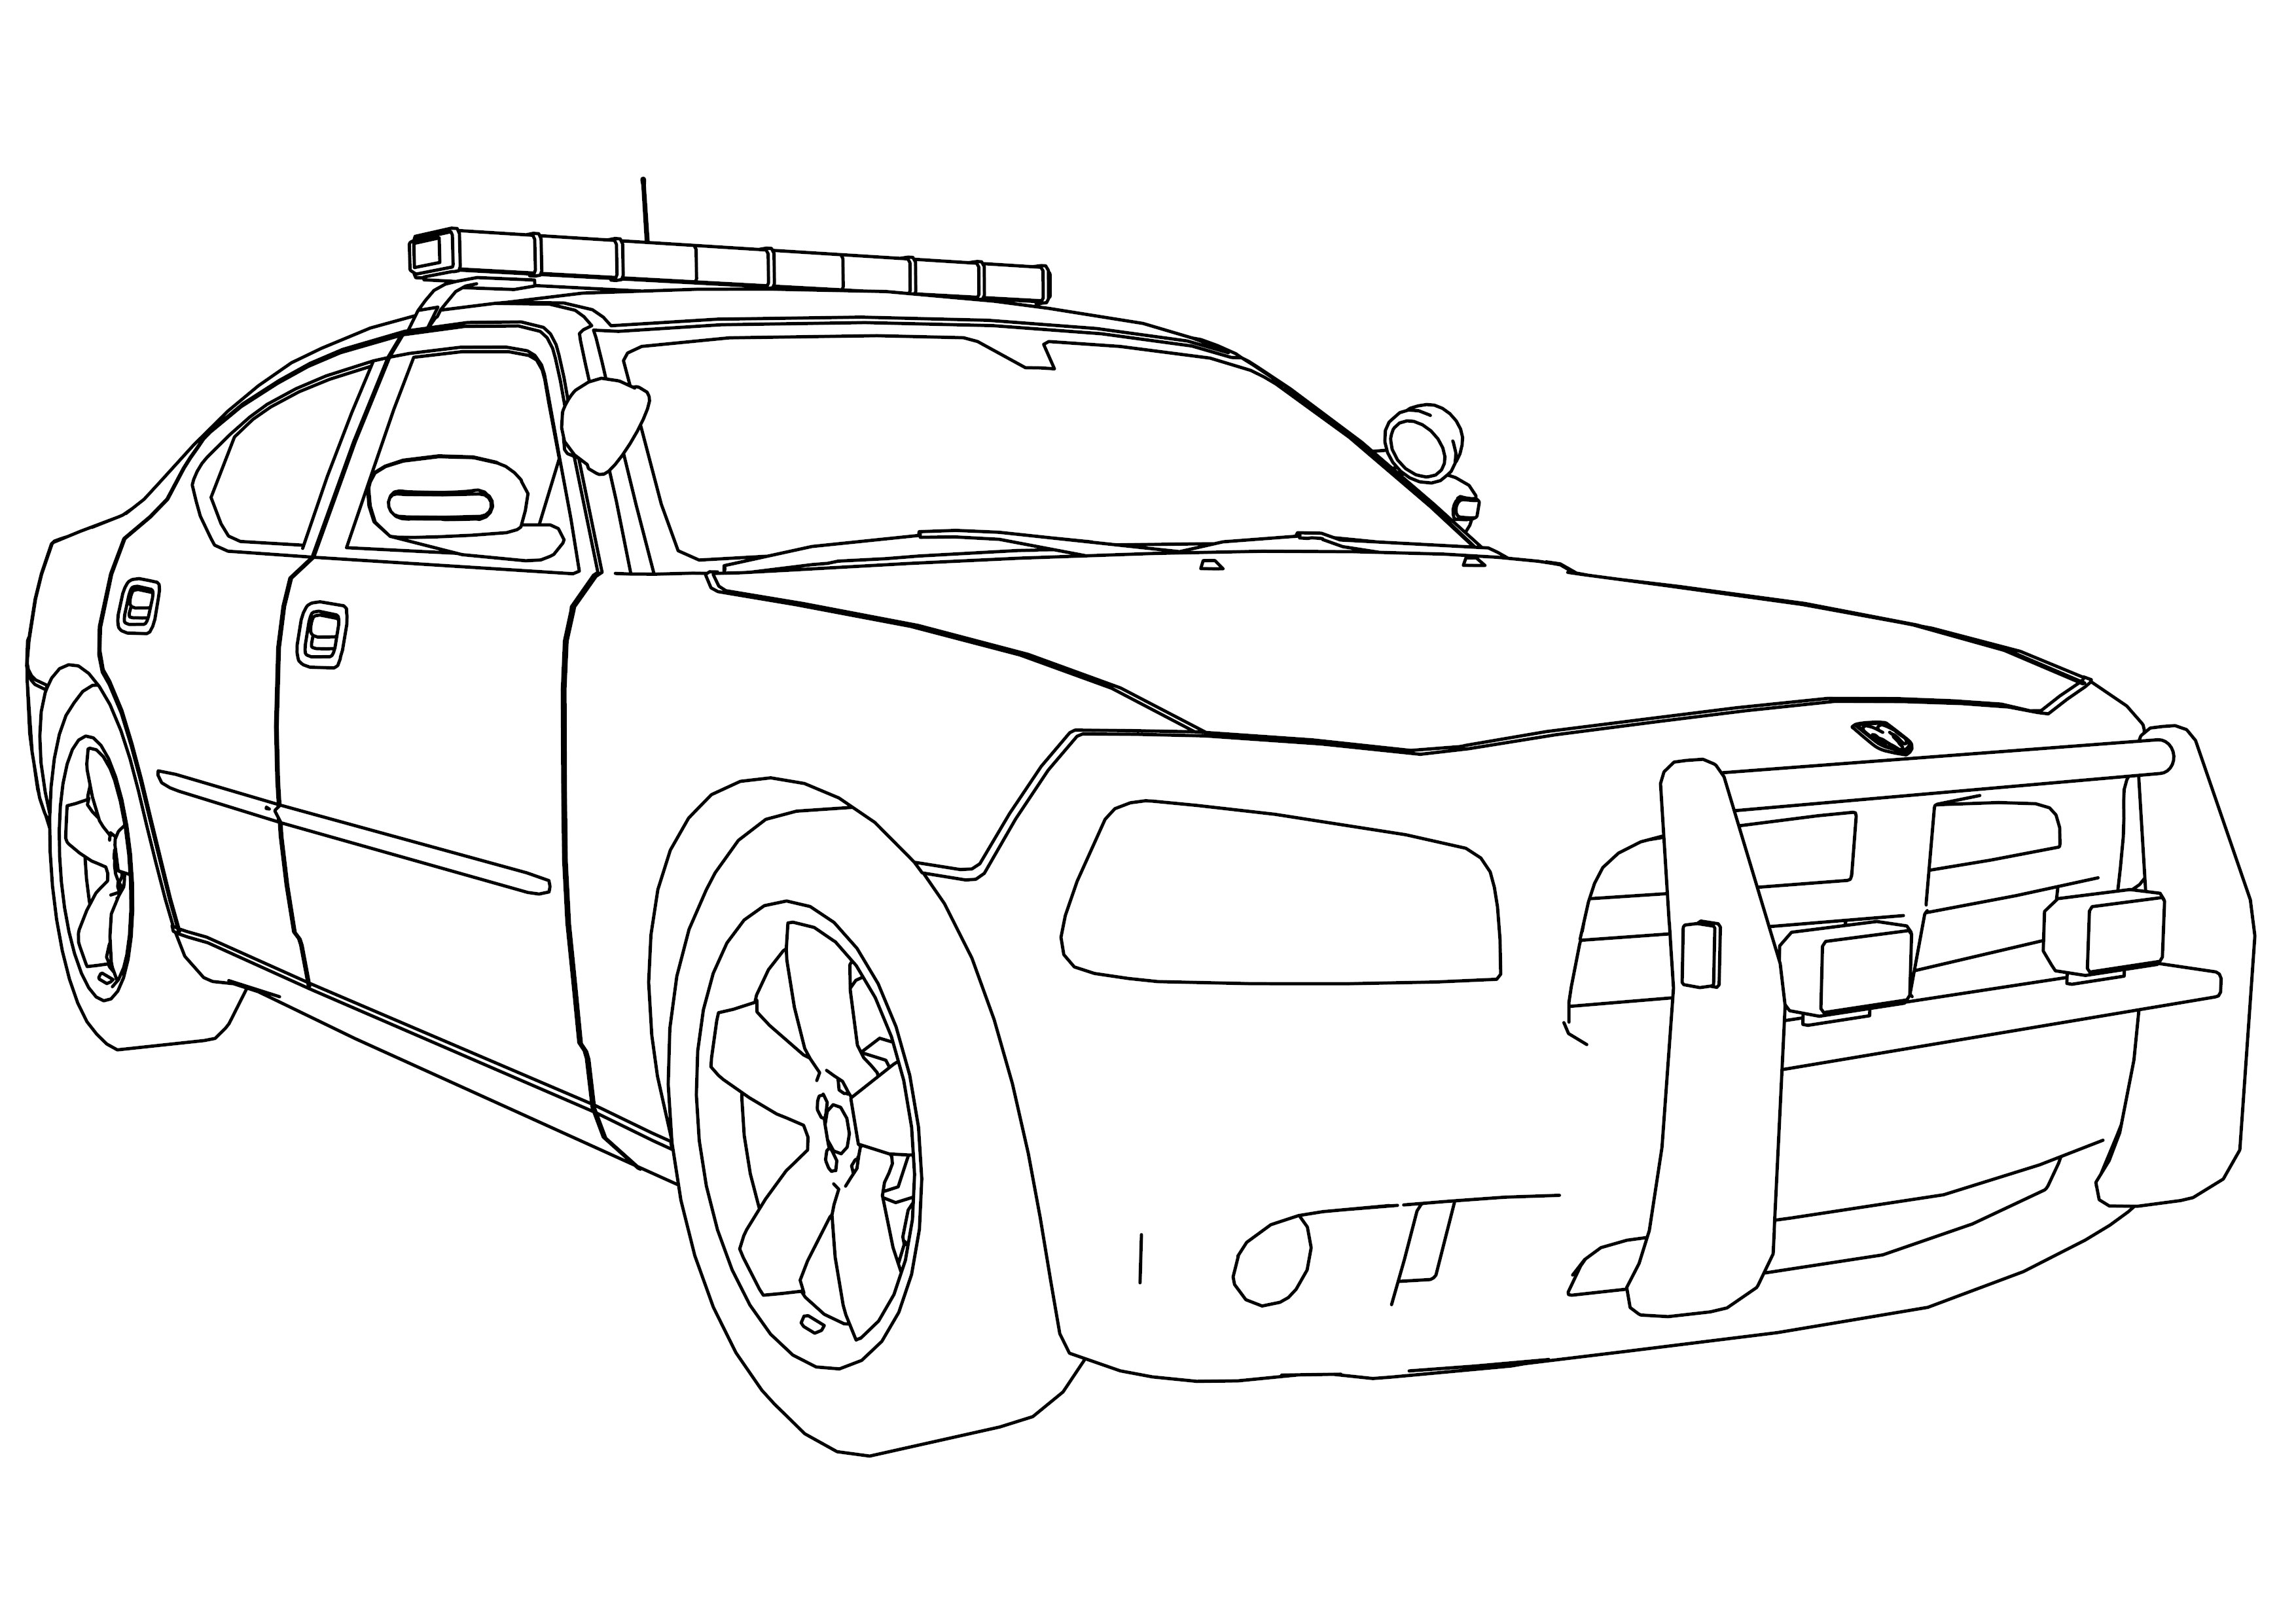 New Police Car Dodge Charger